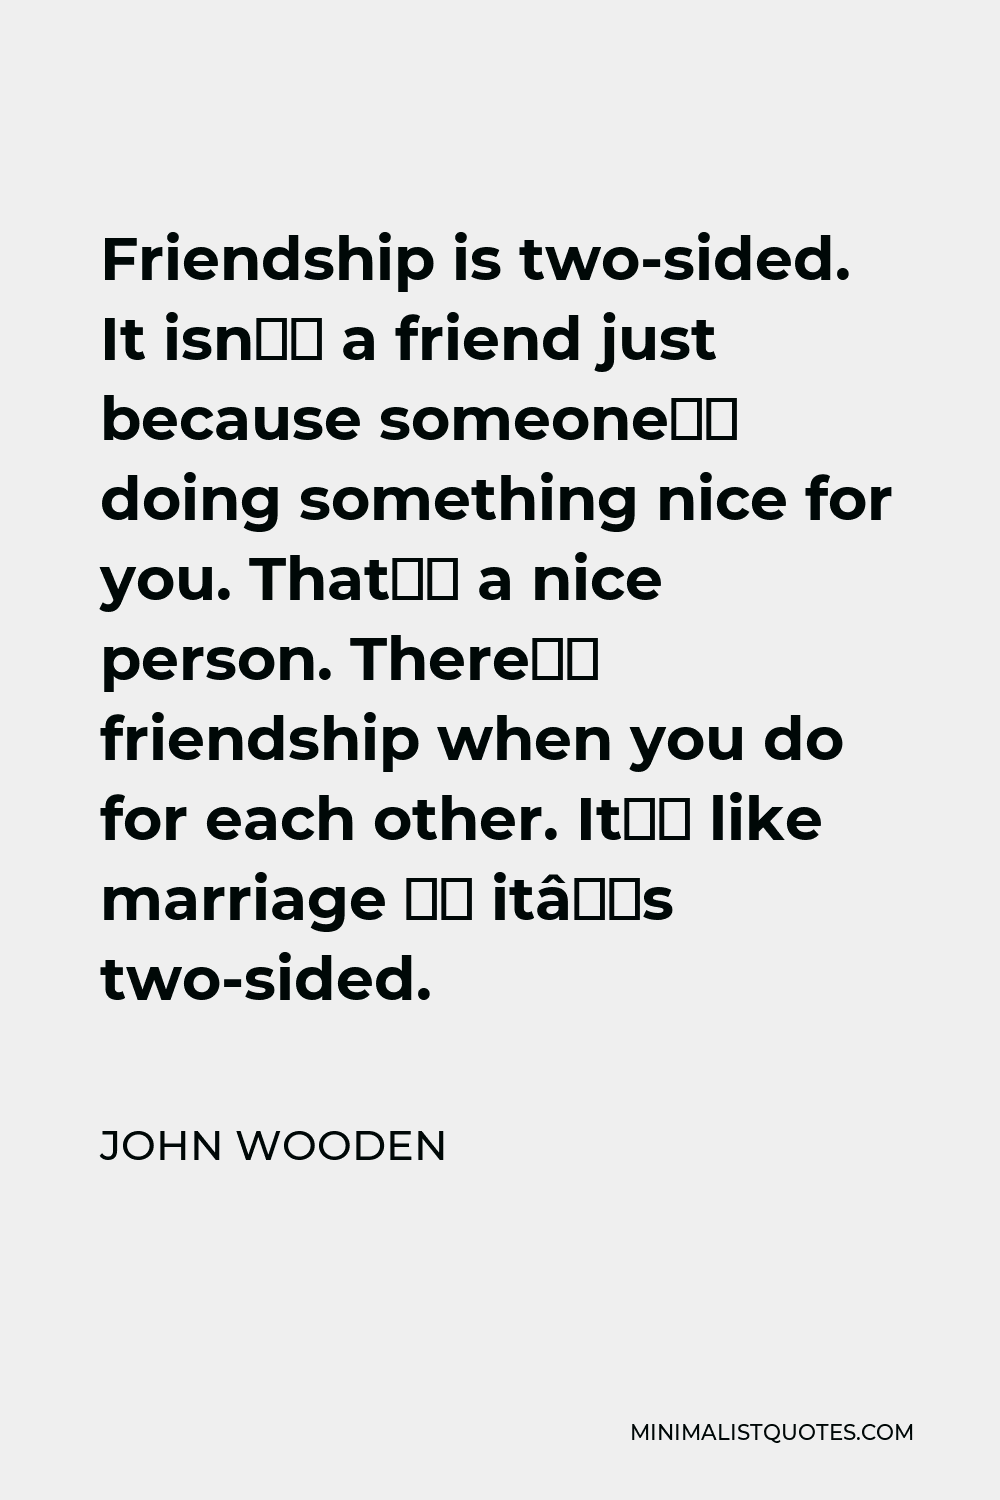 John Wooden Quote: Friendship Is Two-Sided. It Isn'T A Friend Just Because  Someone'S Doing Something Nice For You. That'S A Nice Person. There'S  Friendship When You Do For Each Other. It'S Like